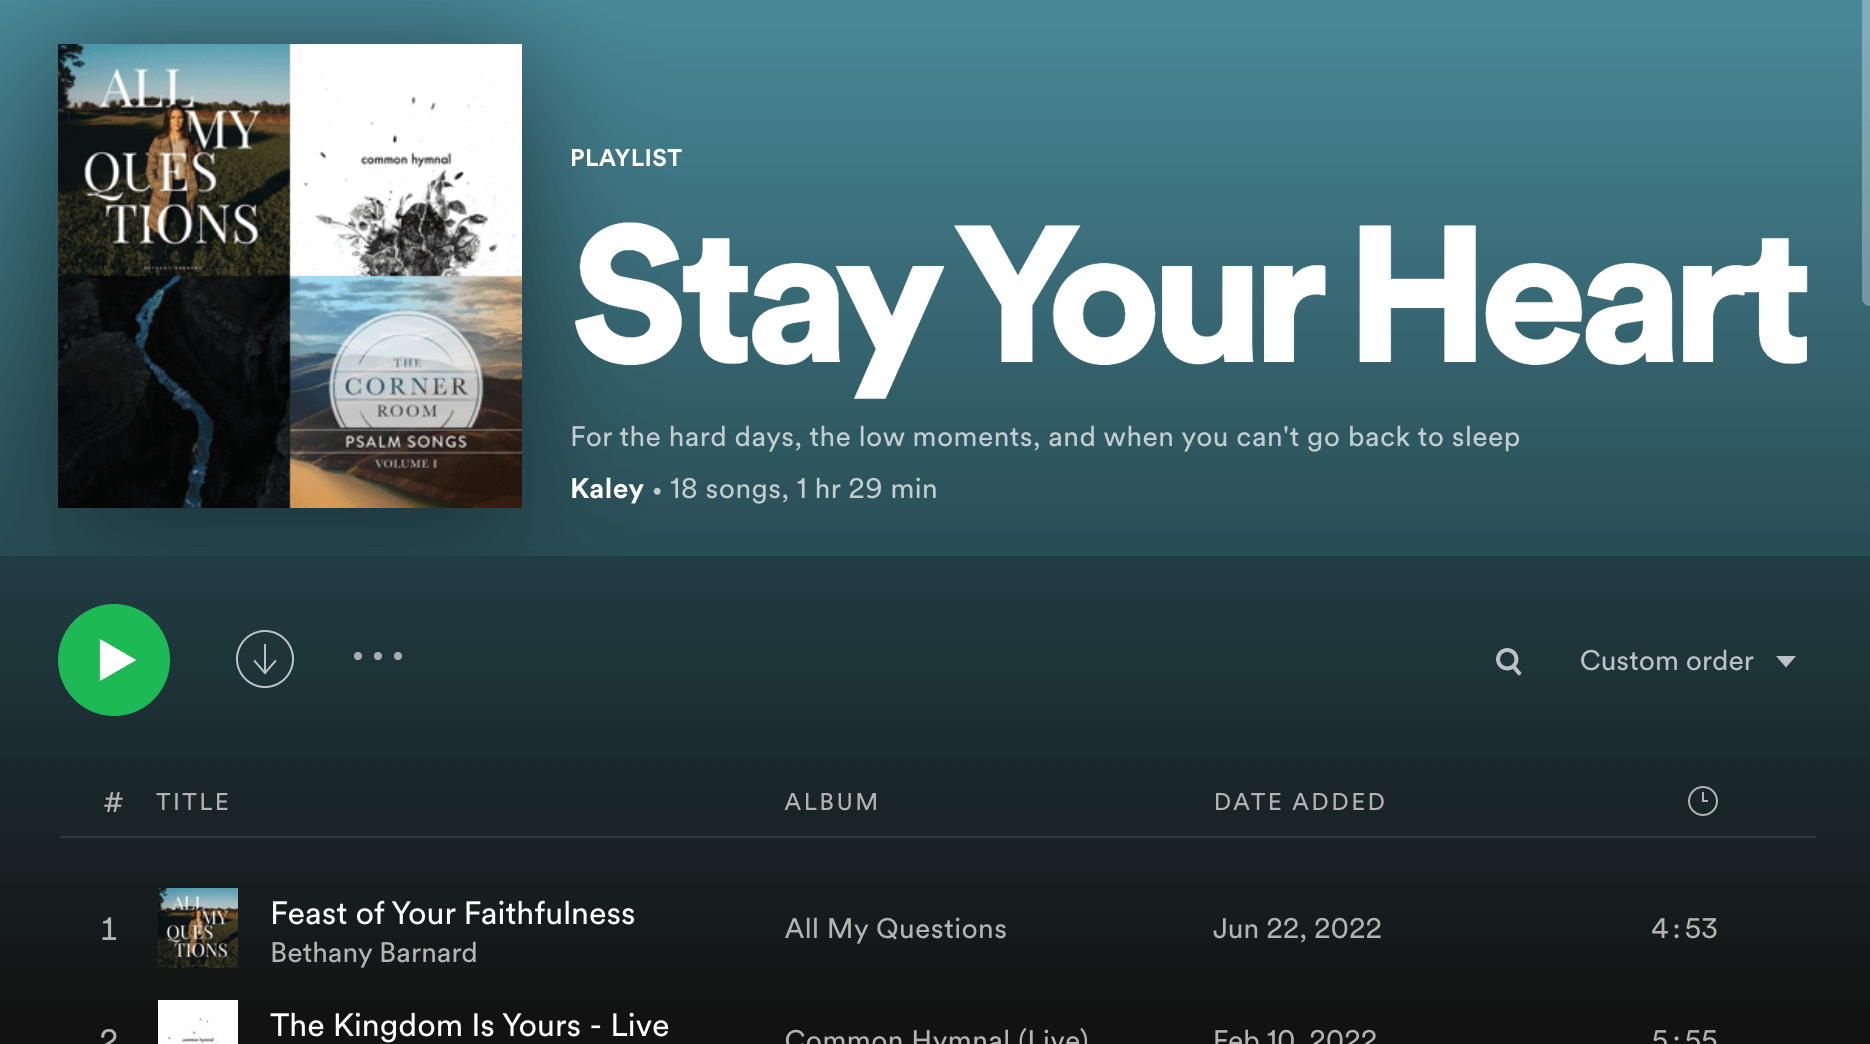 A screenshot of a spotify playlist, called "Stay Your Heart".